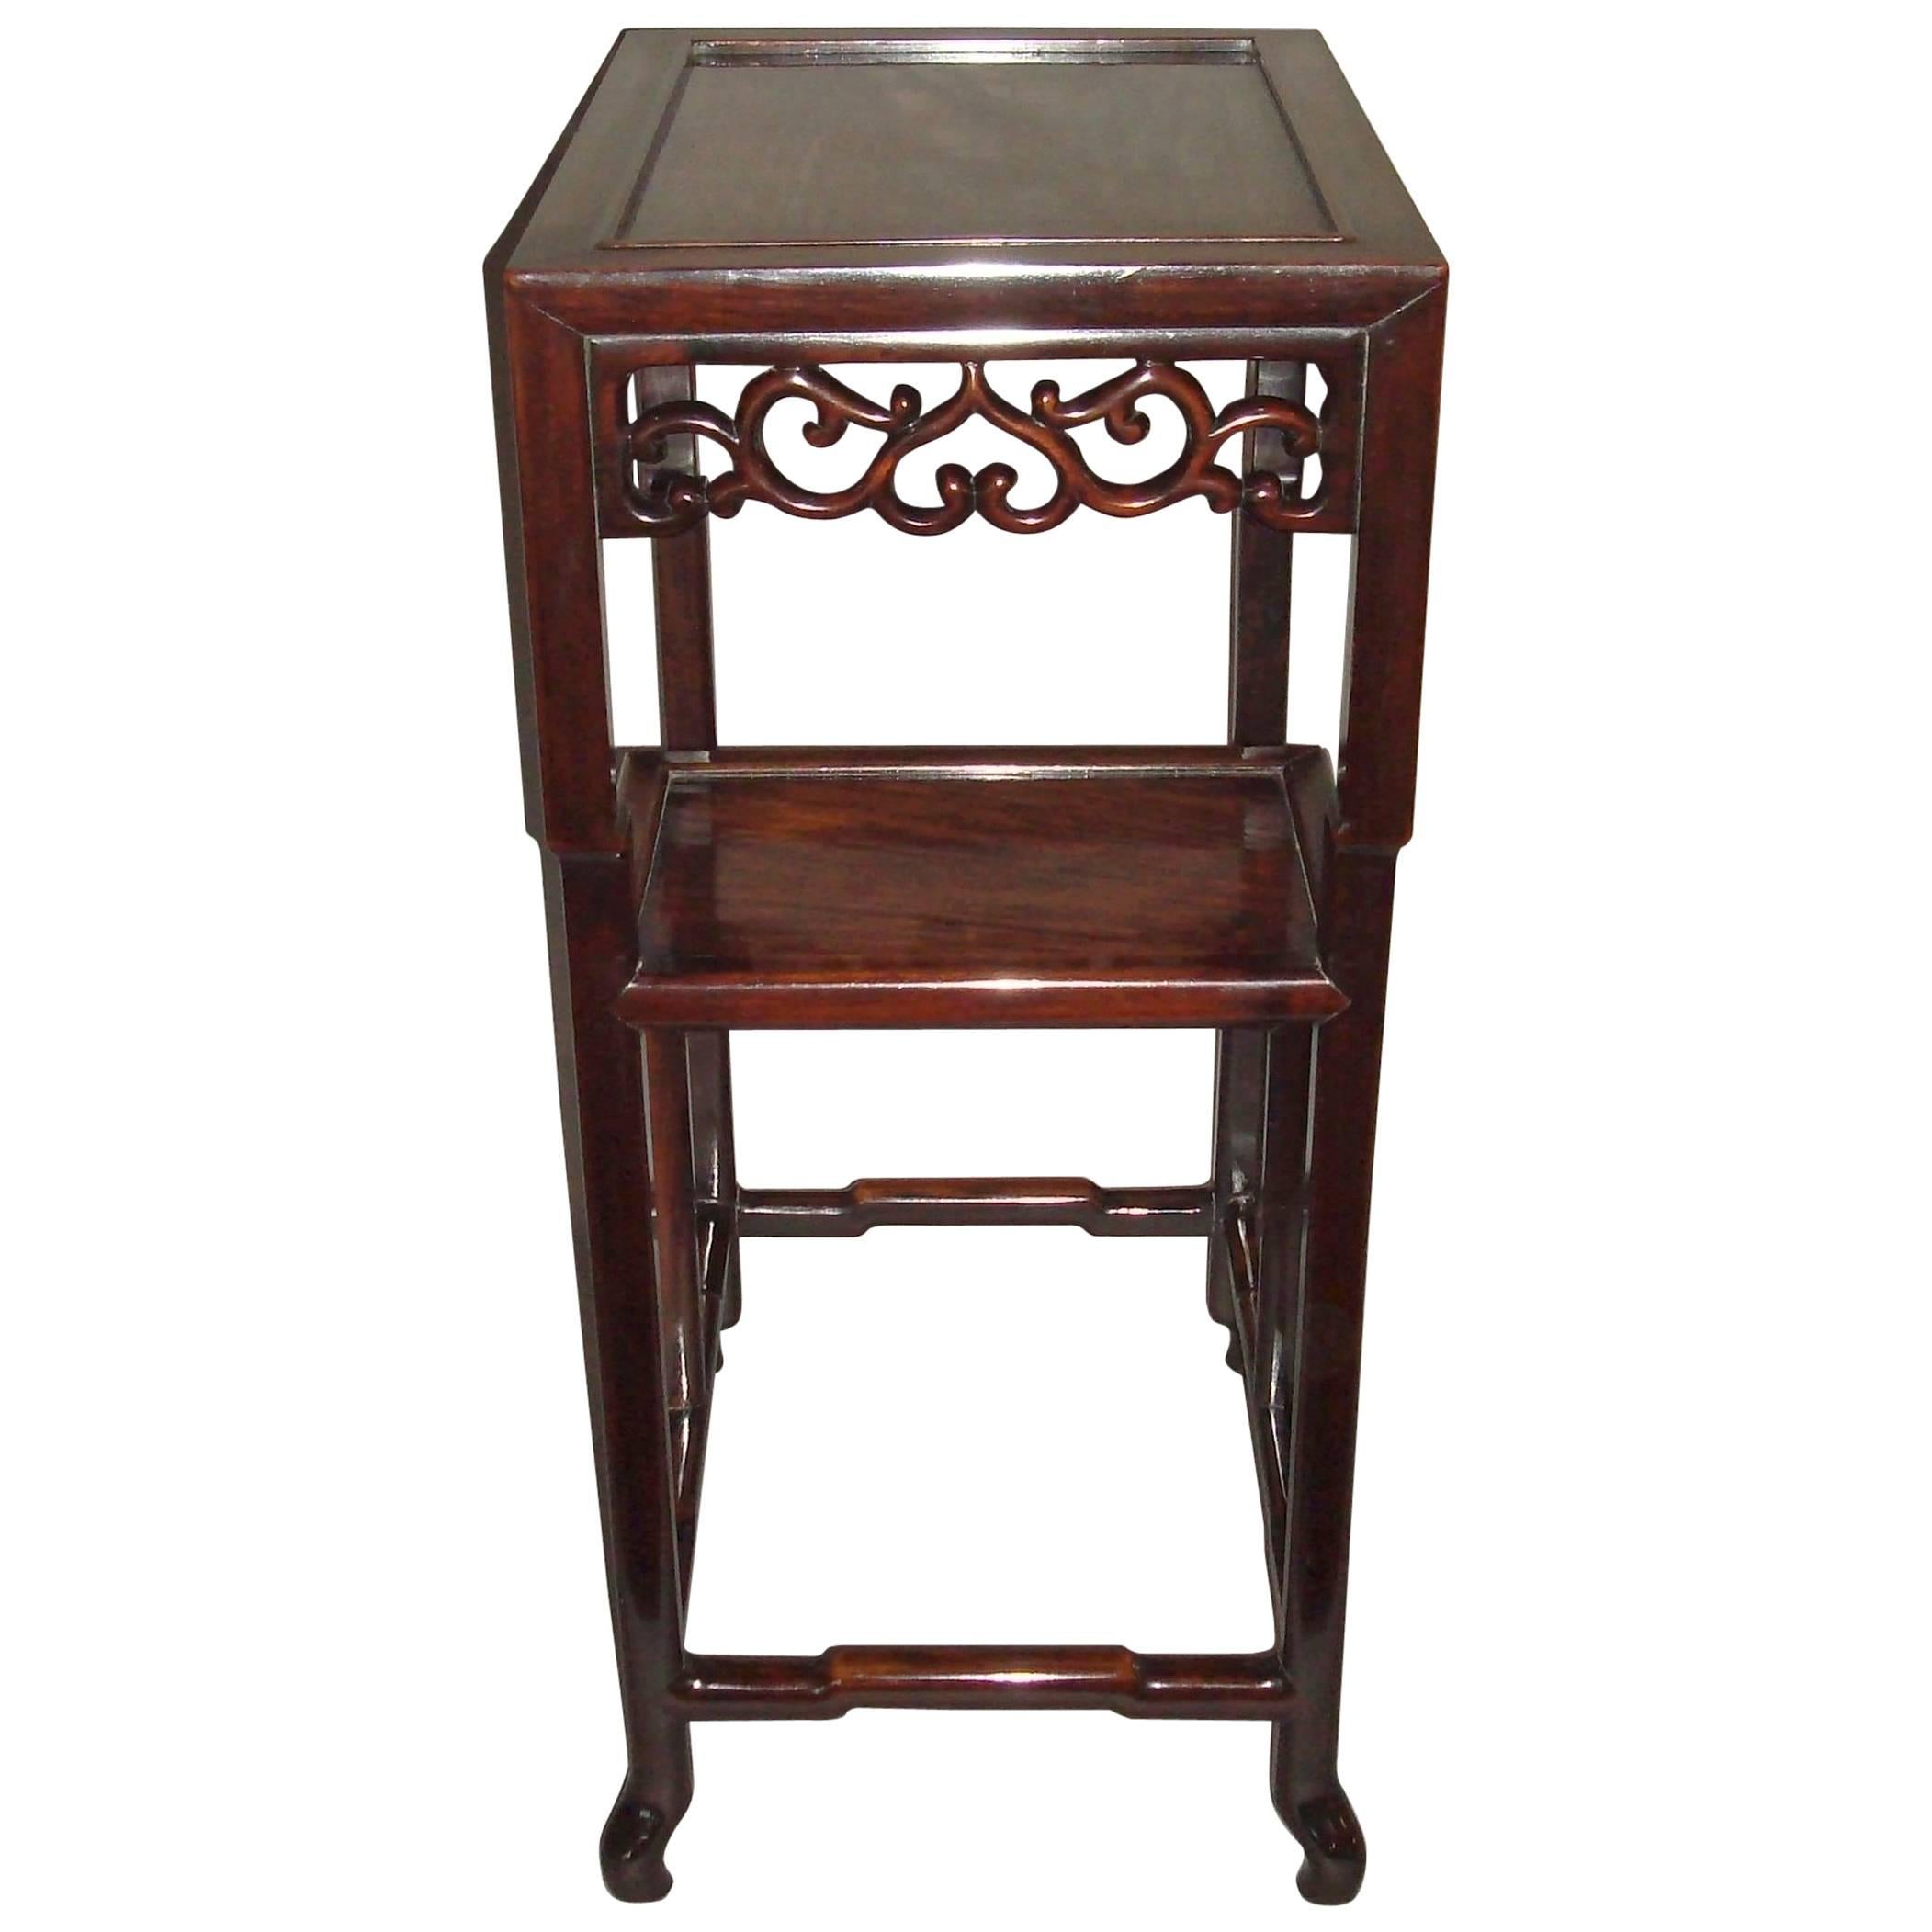 19th century Chinese Hongmu stand/table; the rectangular top with an inset figured panel above a pierced scroll work frieze with two stepped undertiers, on slightly shaped supports terminating in scrolled feet united by shaped stretchers.  Good rich